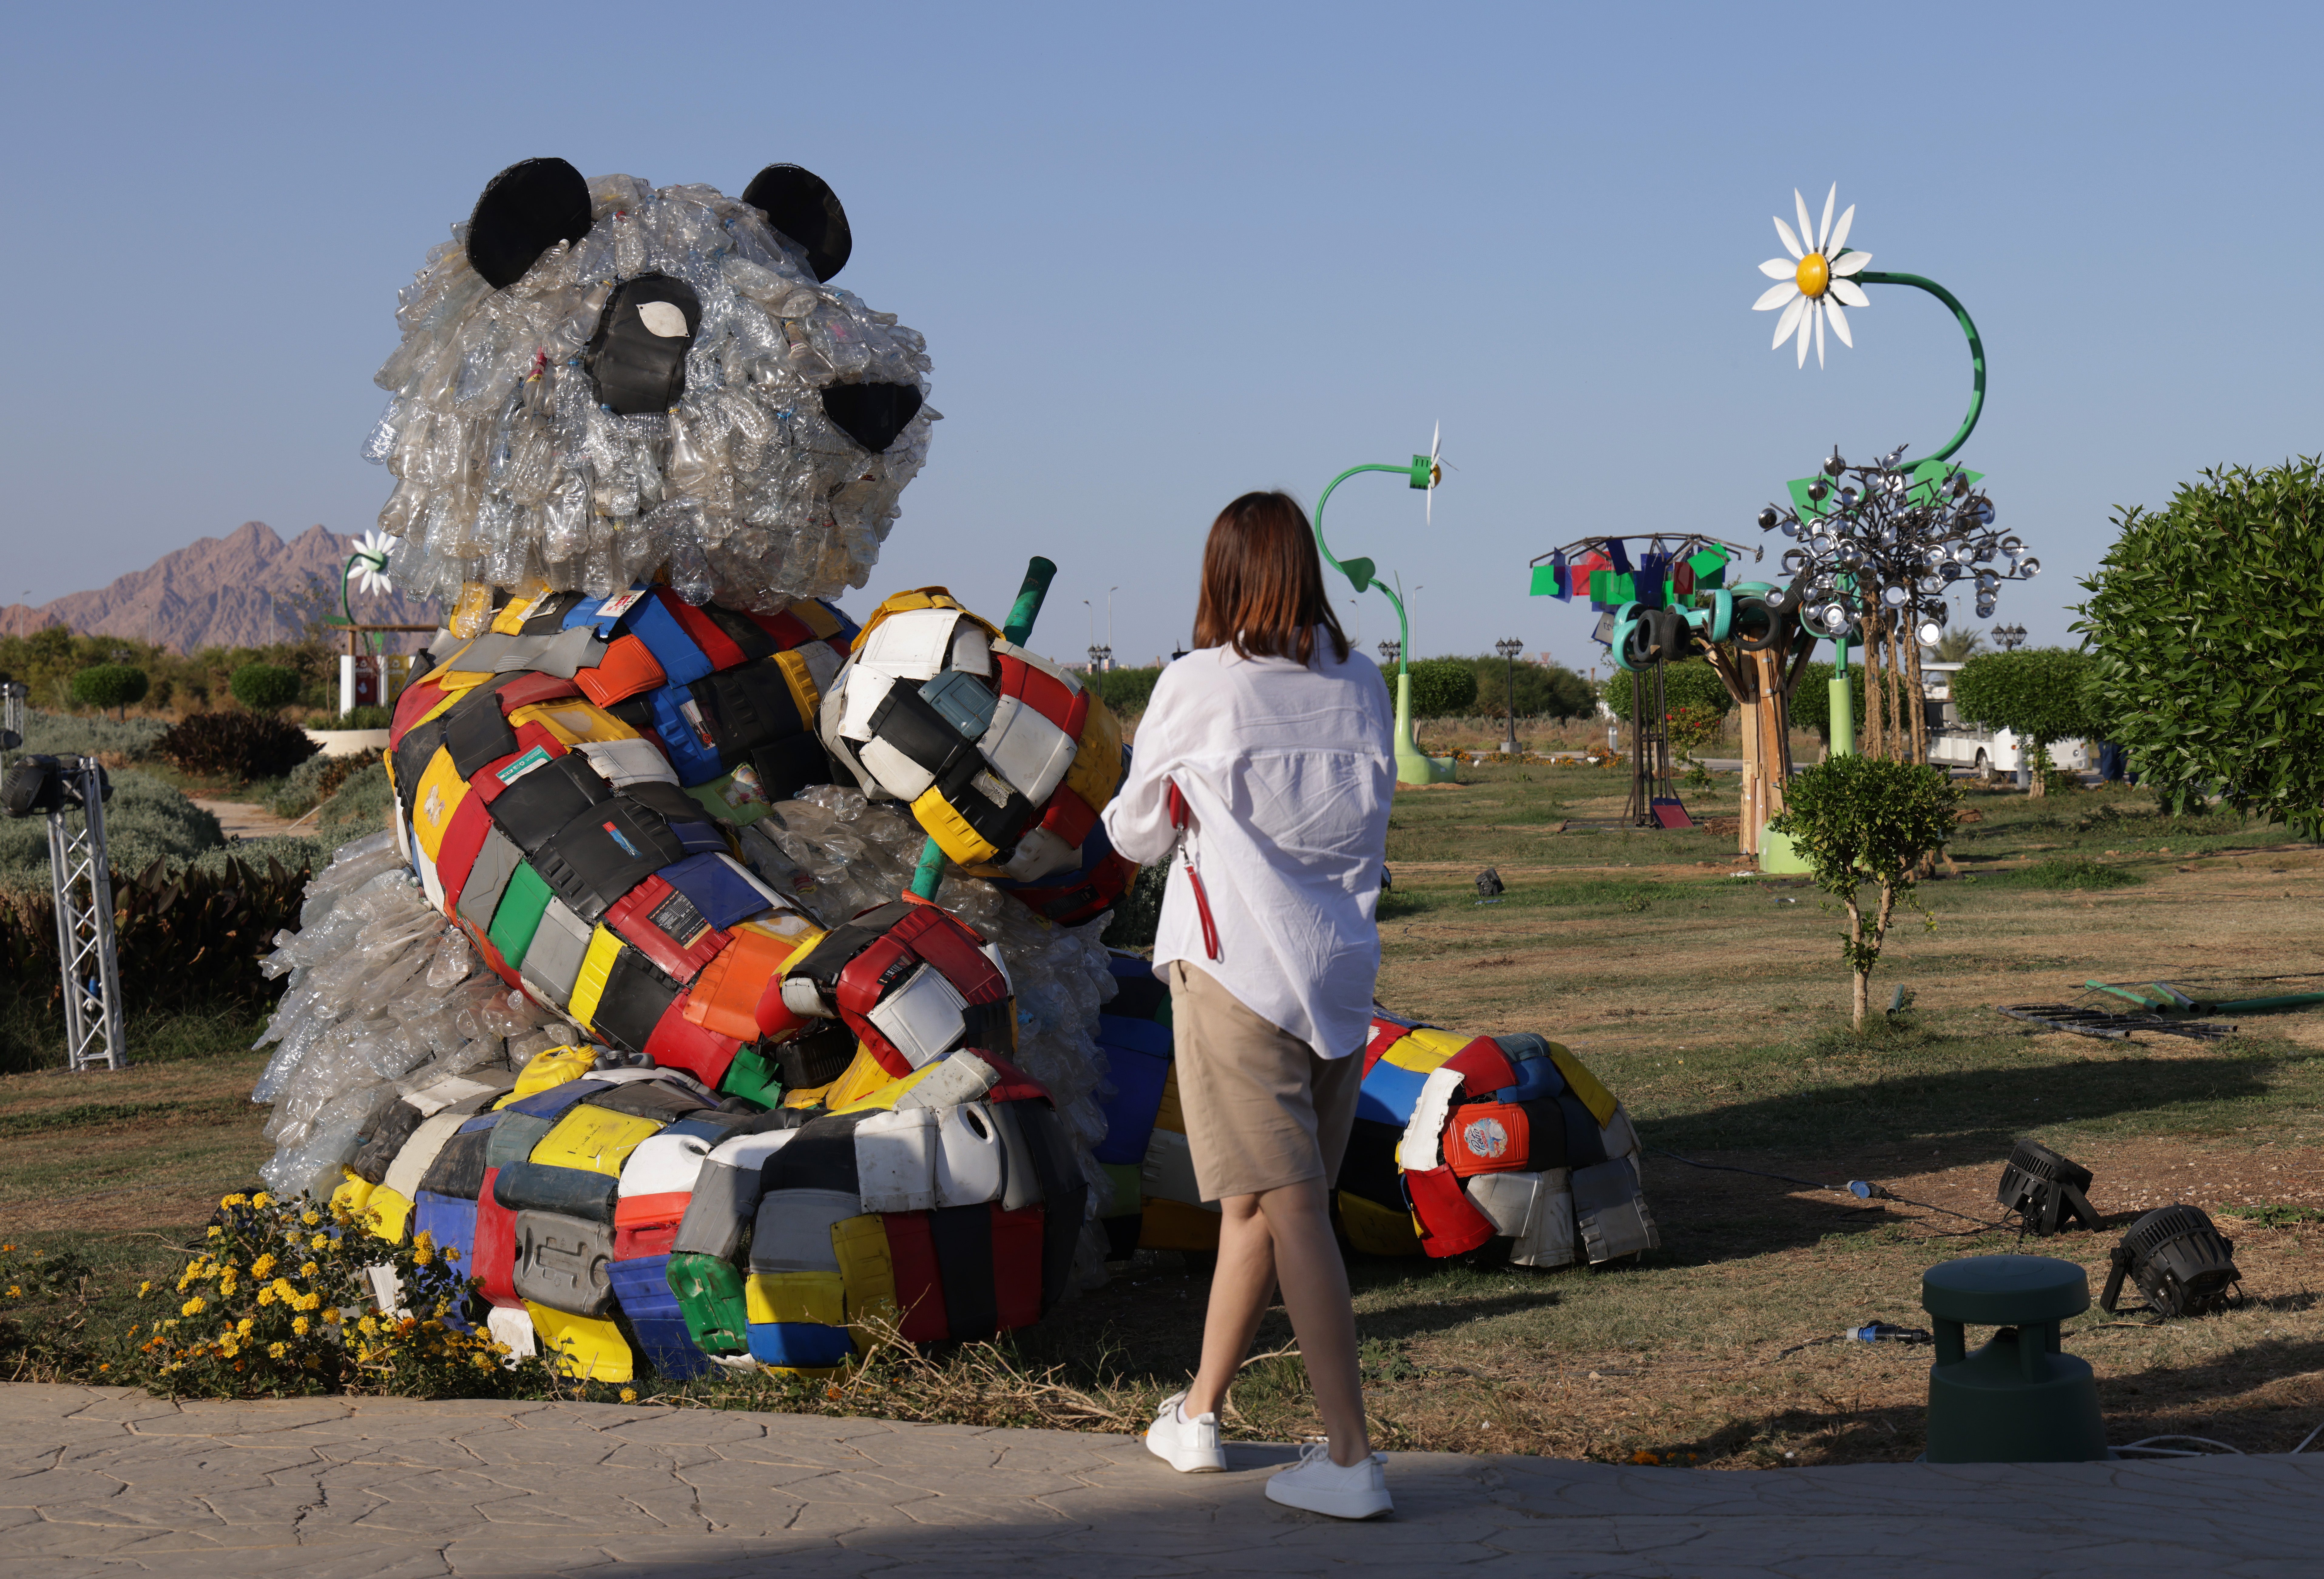 A visitor photographs a bear made of plastic waste in the Green Zone of the Cop27 climate conference